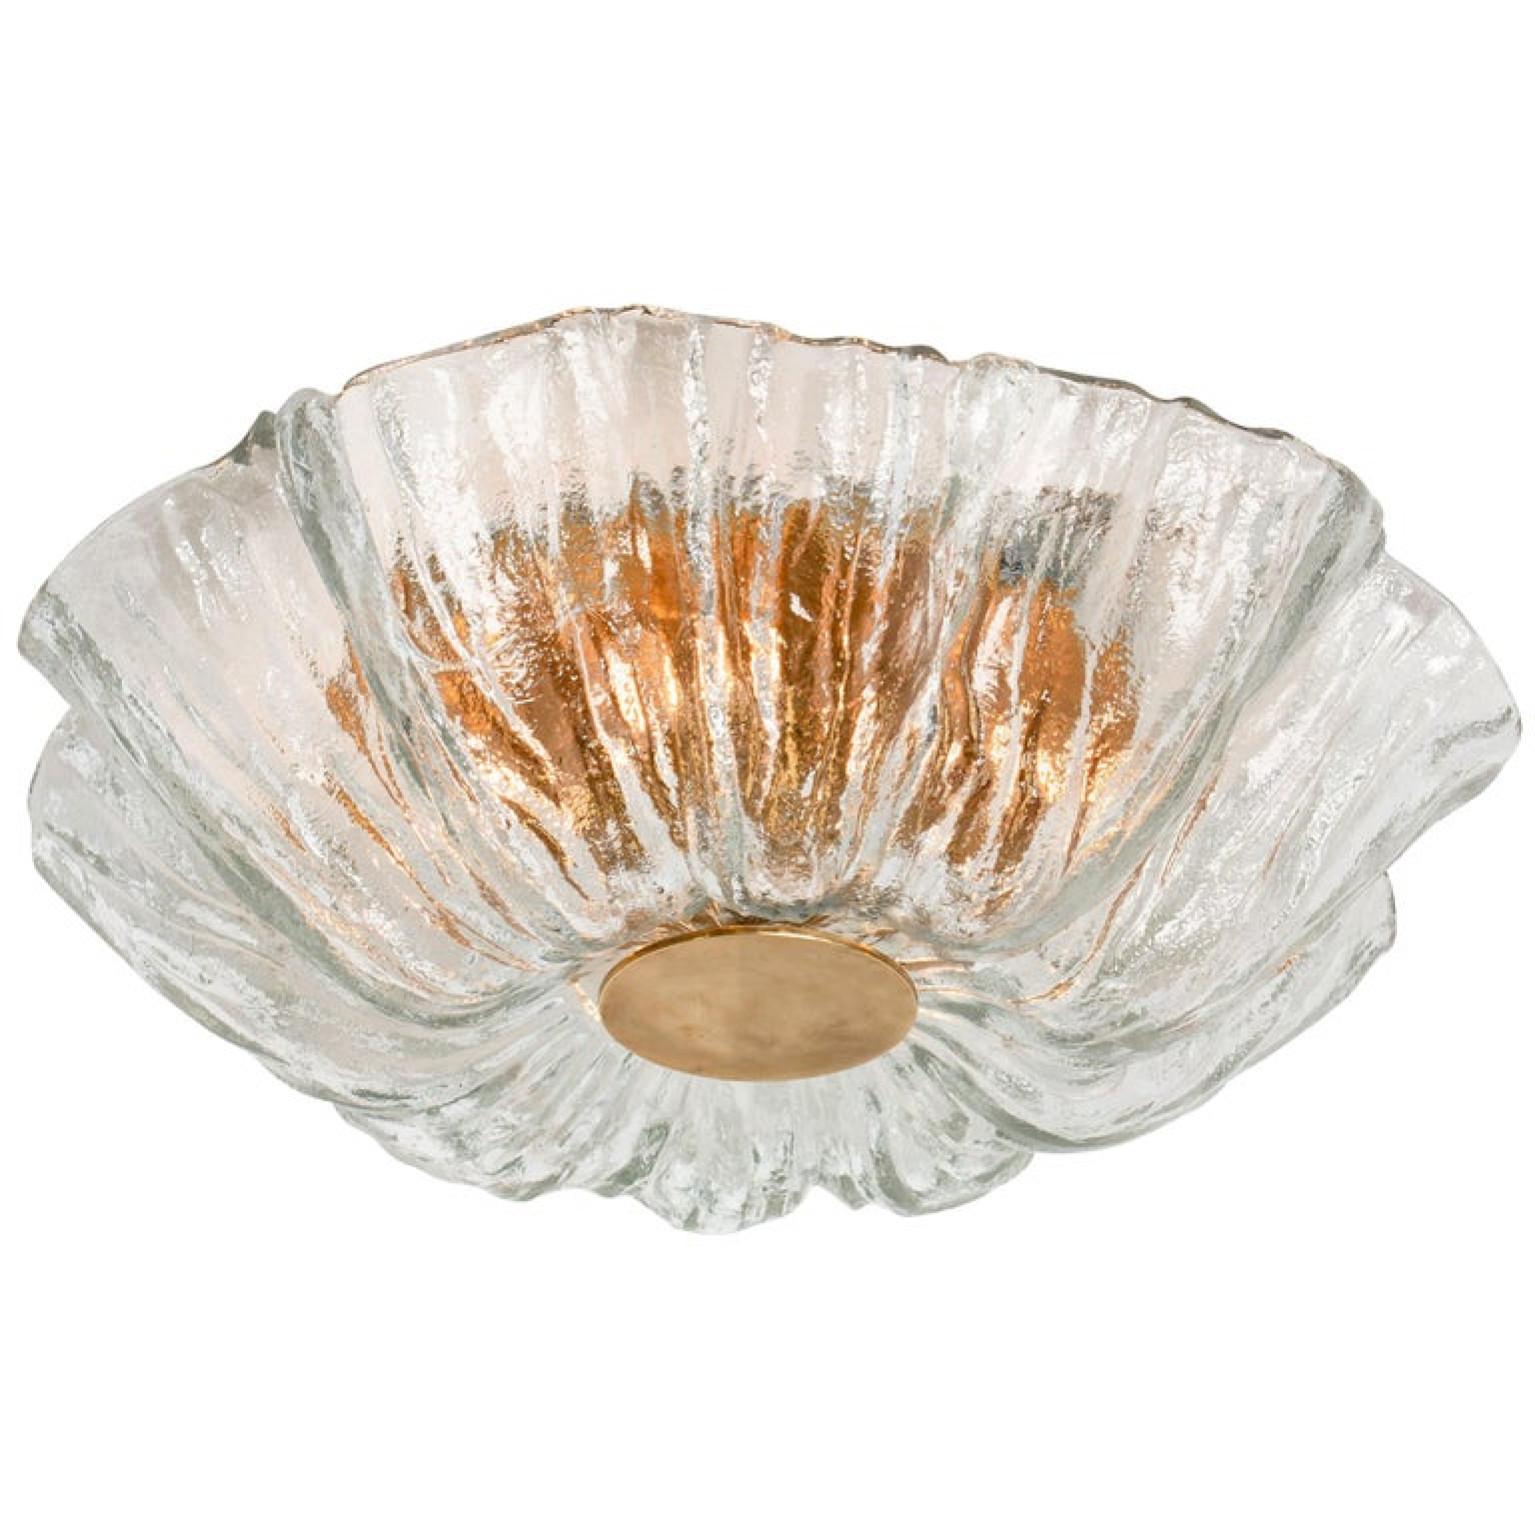 One of two high quality modern textured ice glass flushmounts by Kaiser, circa 1965.
This flushmounts are featuring a huge round hand blown flower glass dish giving the piece a heavy ice appearance which refracts the light, filling a room with a